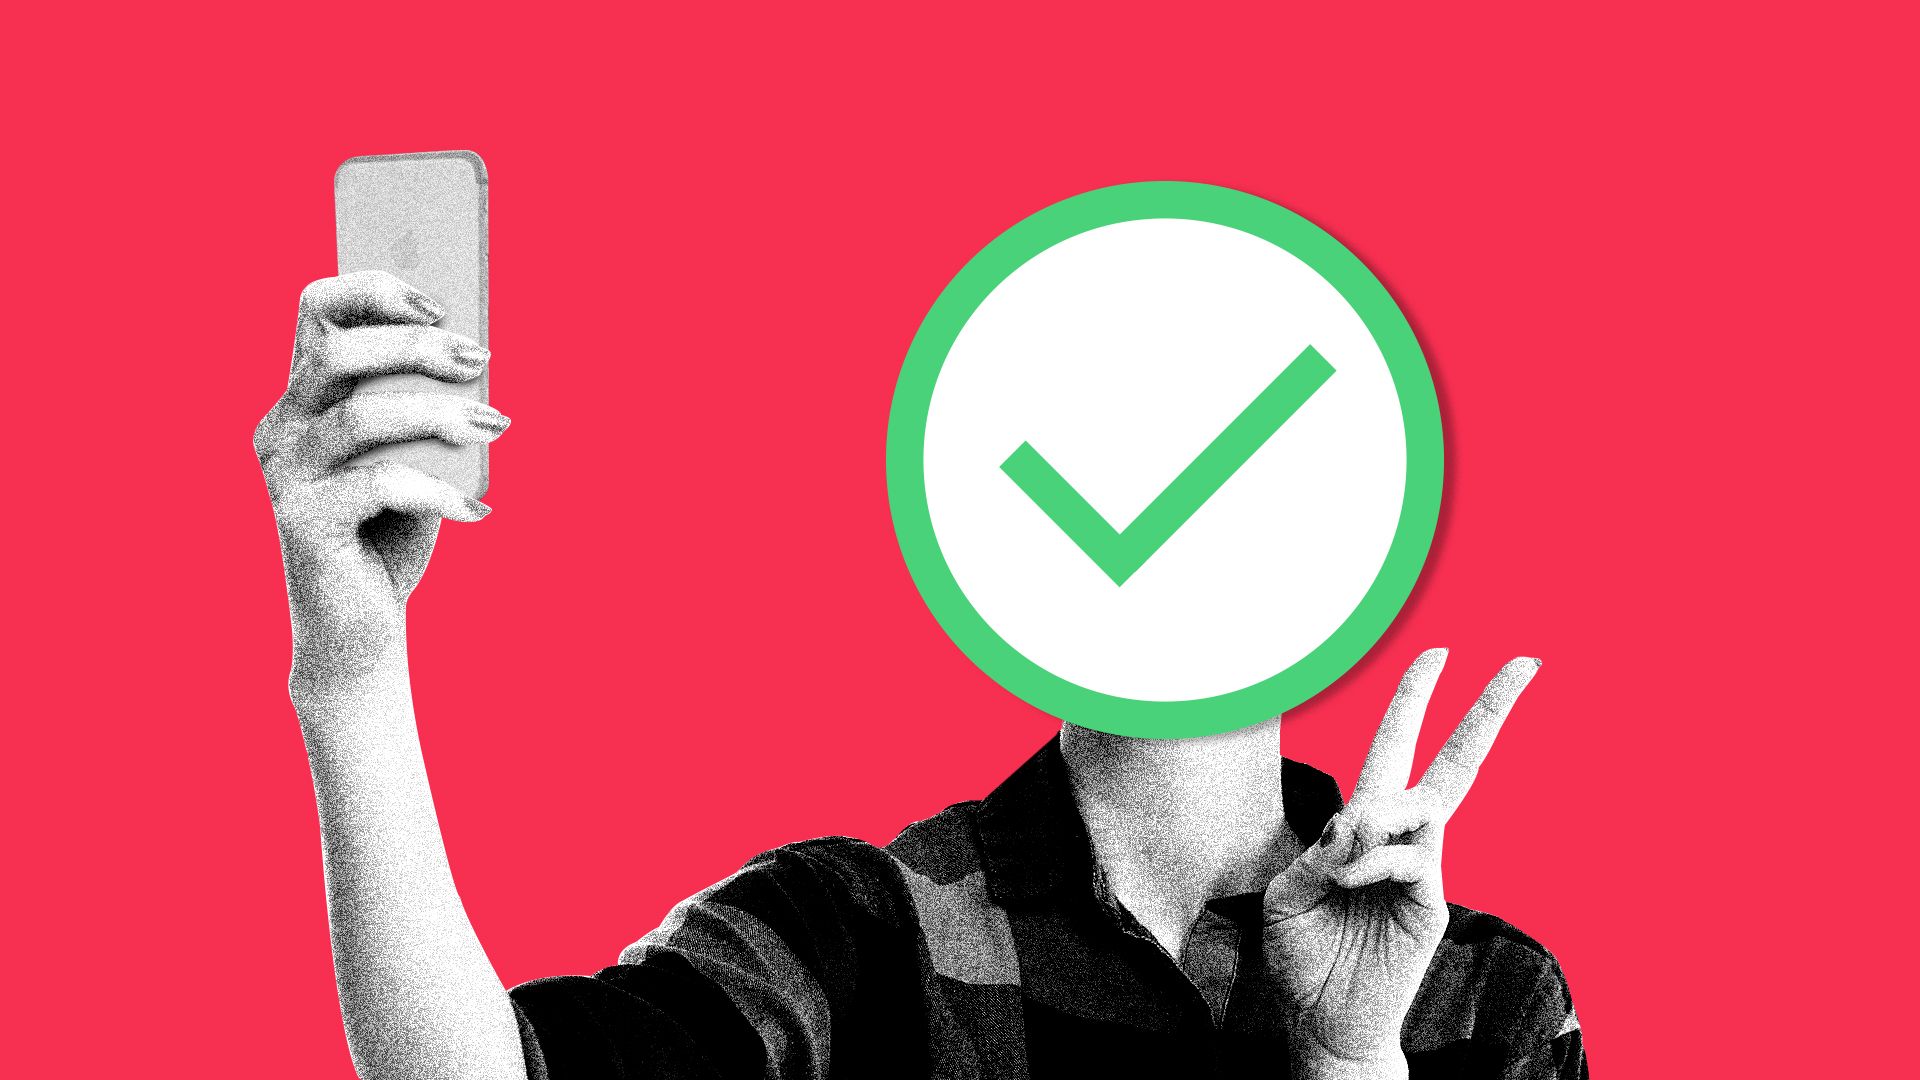 In this illustration, a green check mark is superimposed over a person's head as they take a selfie. 